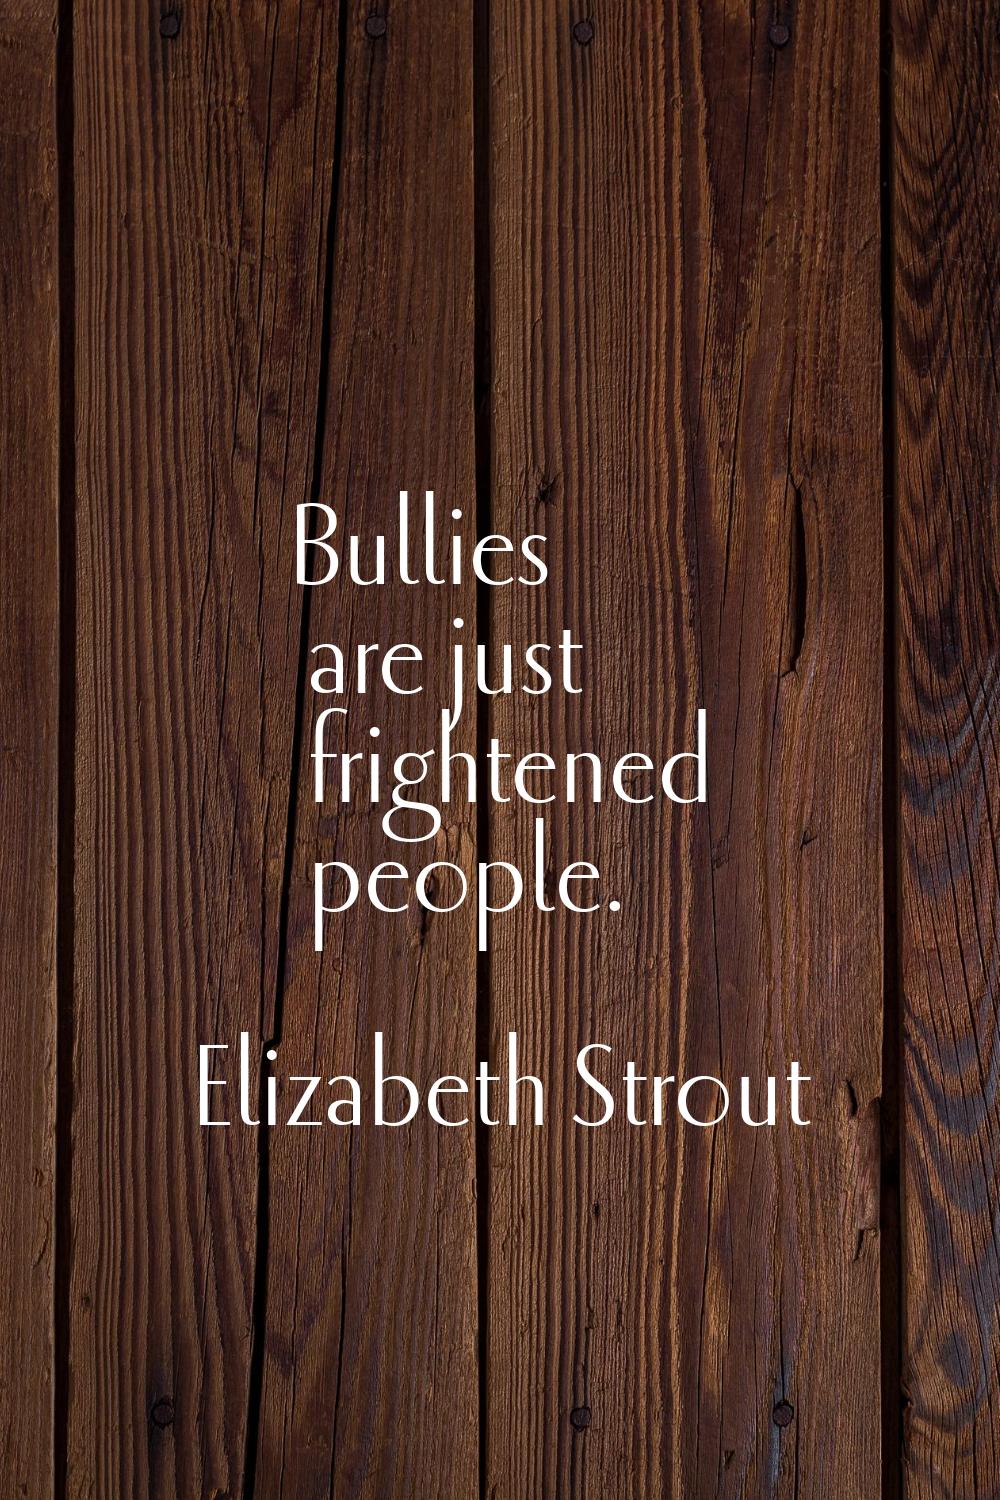 Bullies are just frightened people.